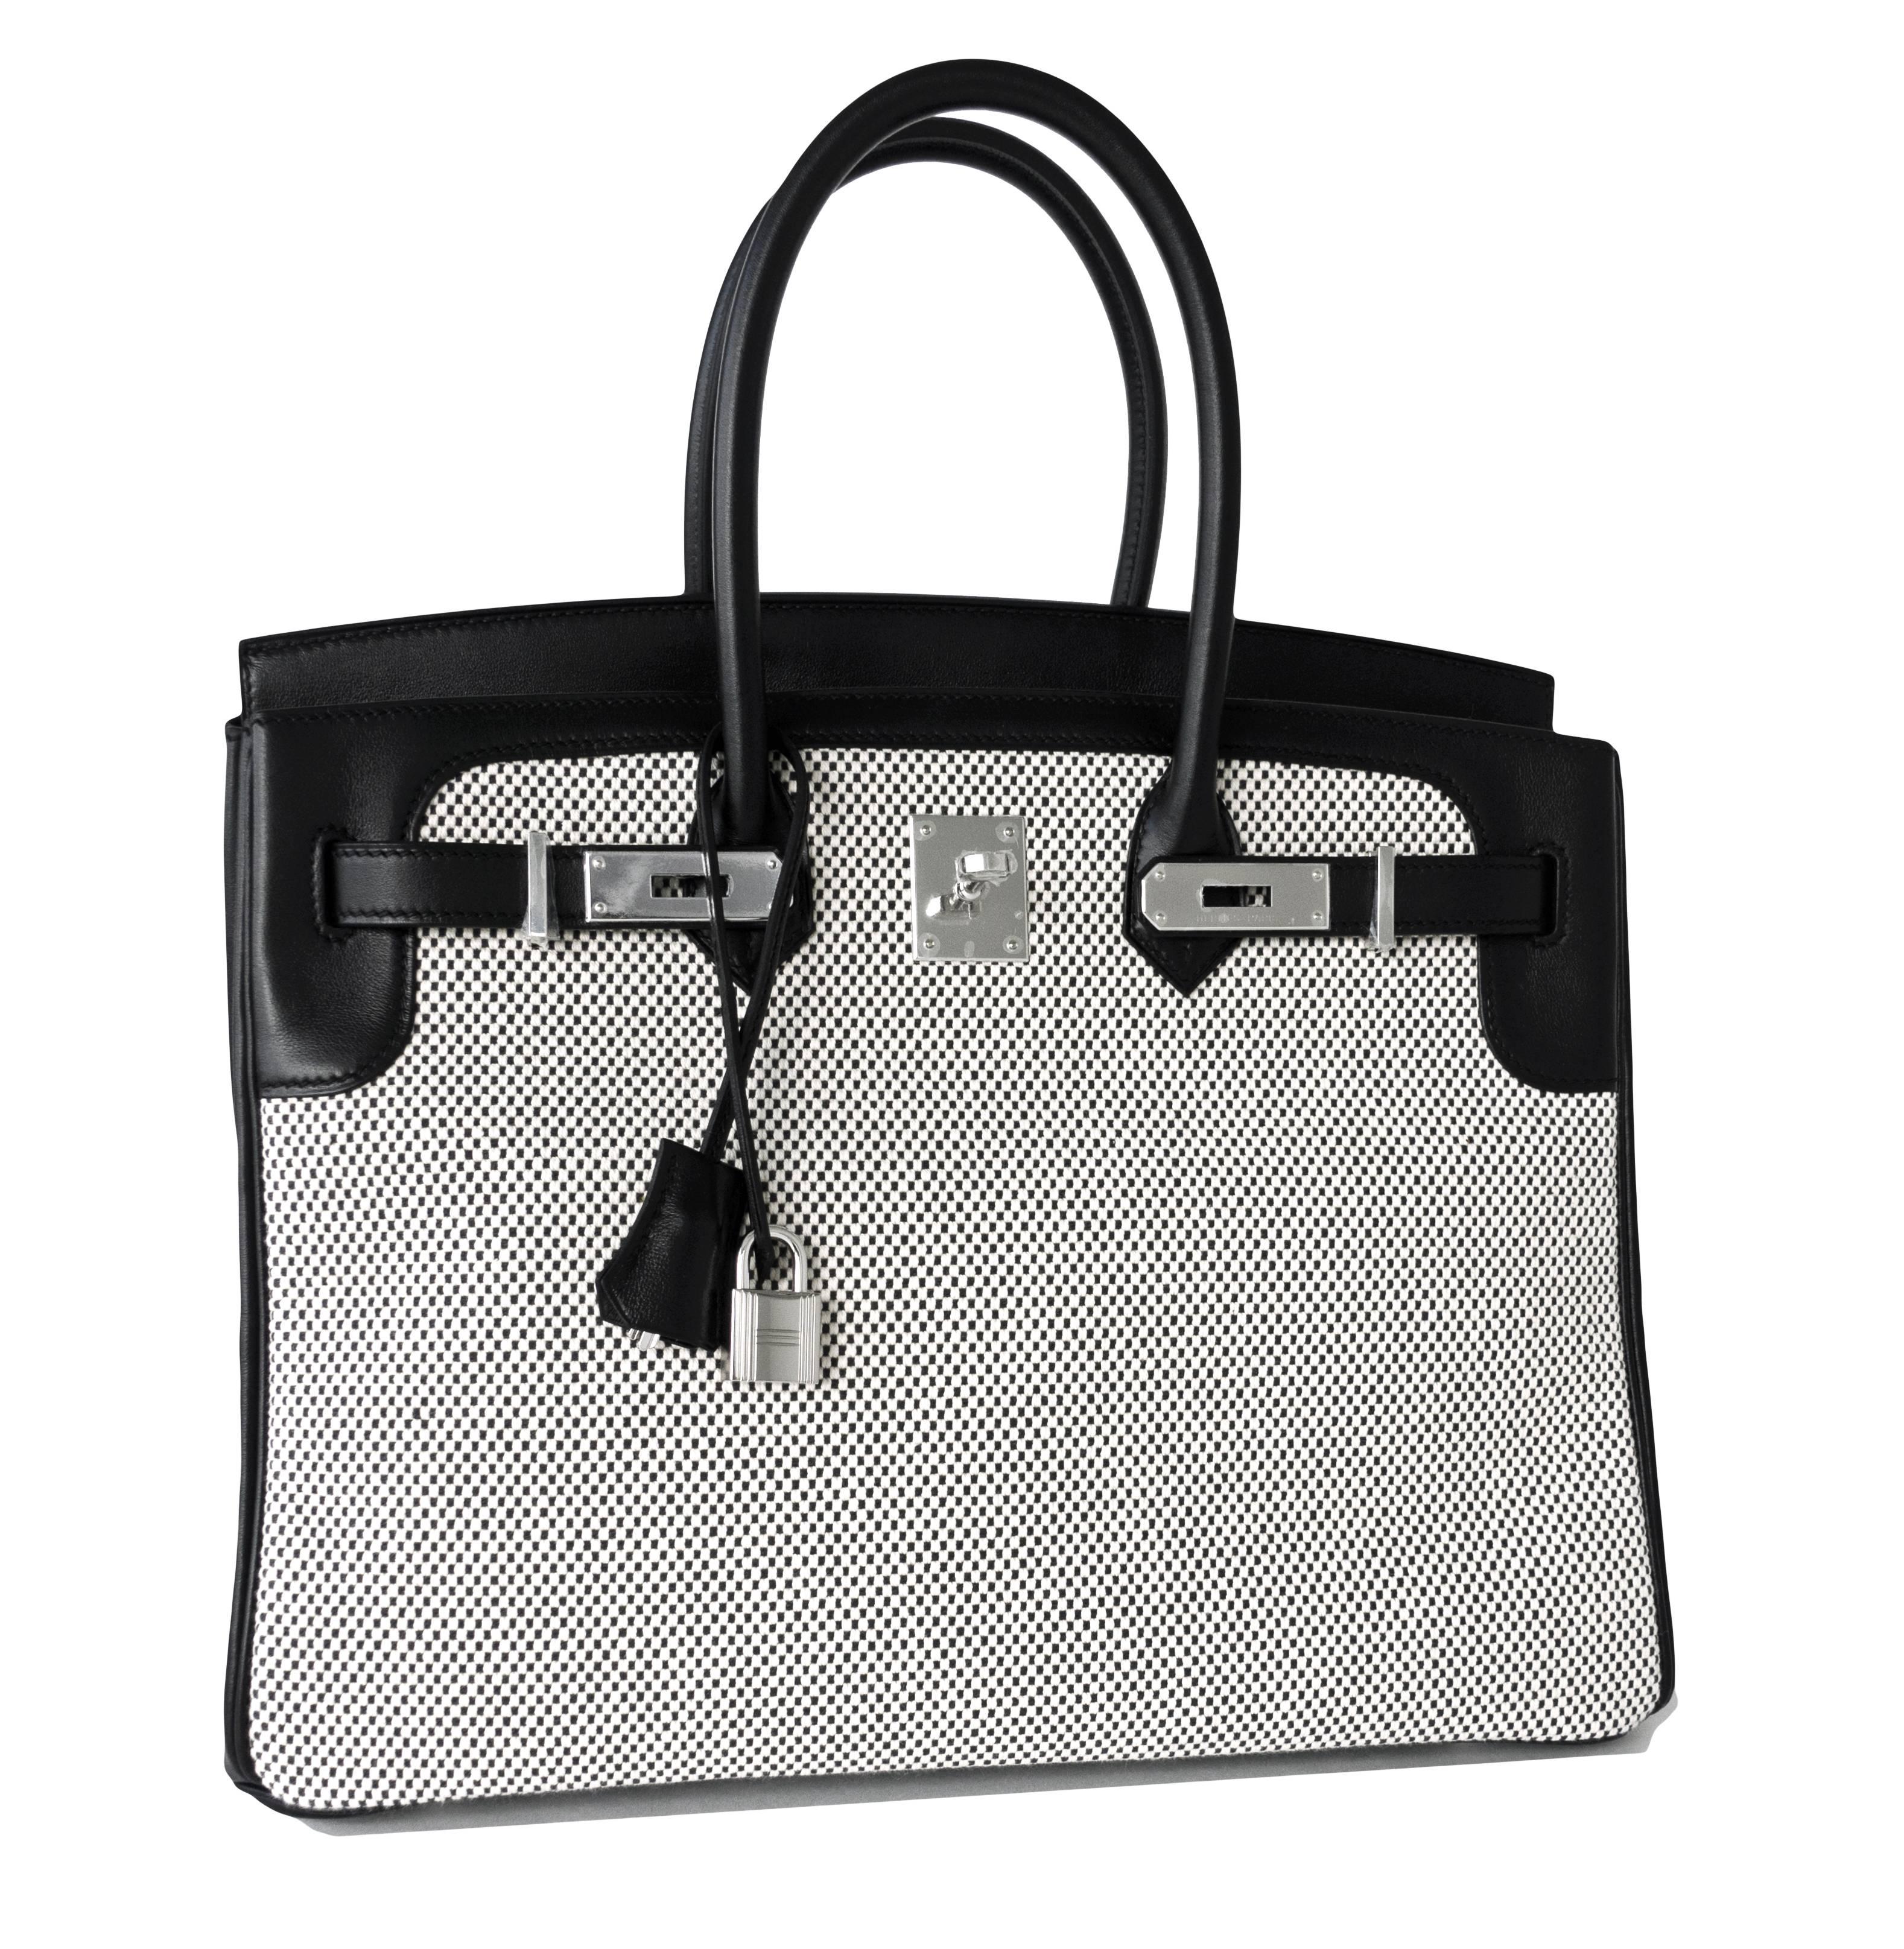 Hermes Black Swift Leather Criss Cross Ecru Graphite Toile 35cm Birkin 
Brand New in Box. Pristine condition (with plastic on hardware). 
Just purchased from store; bag bears new interior X stamp.
Perfect gift! Comes full set with keys, lock,